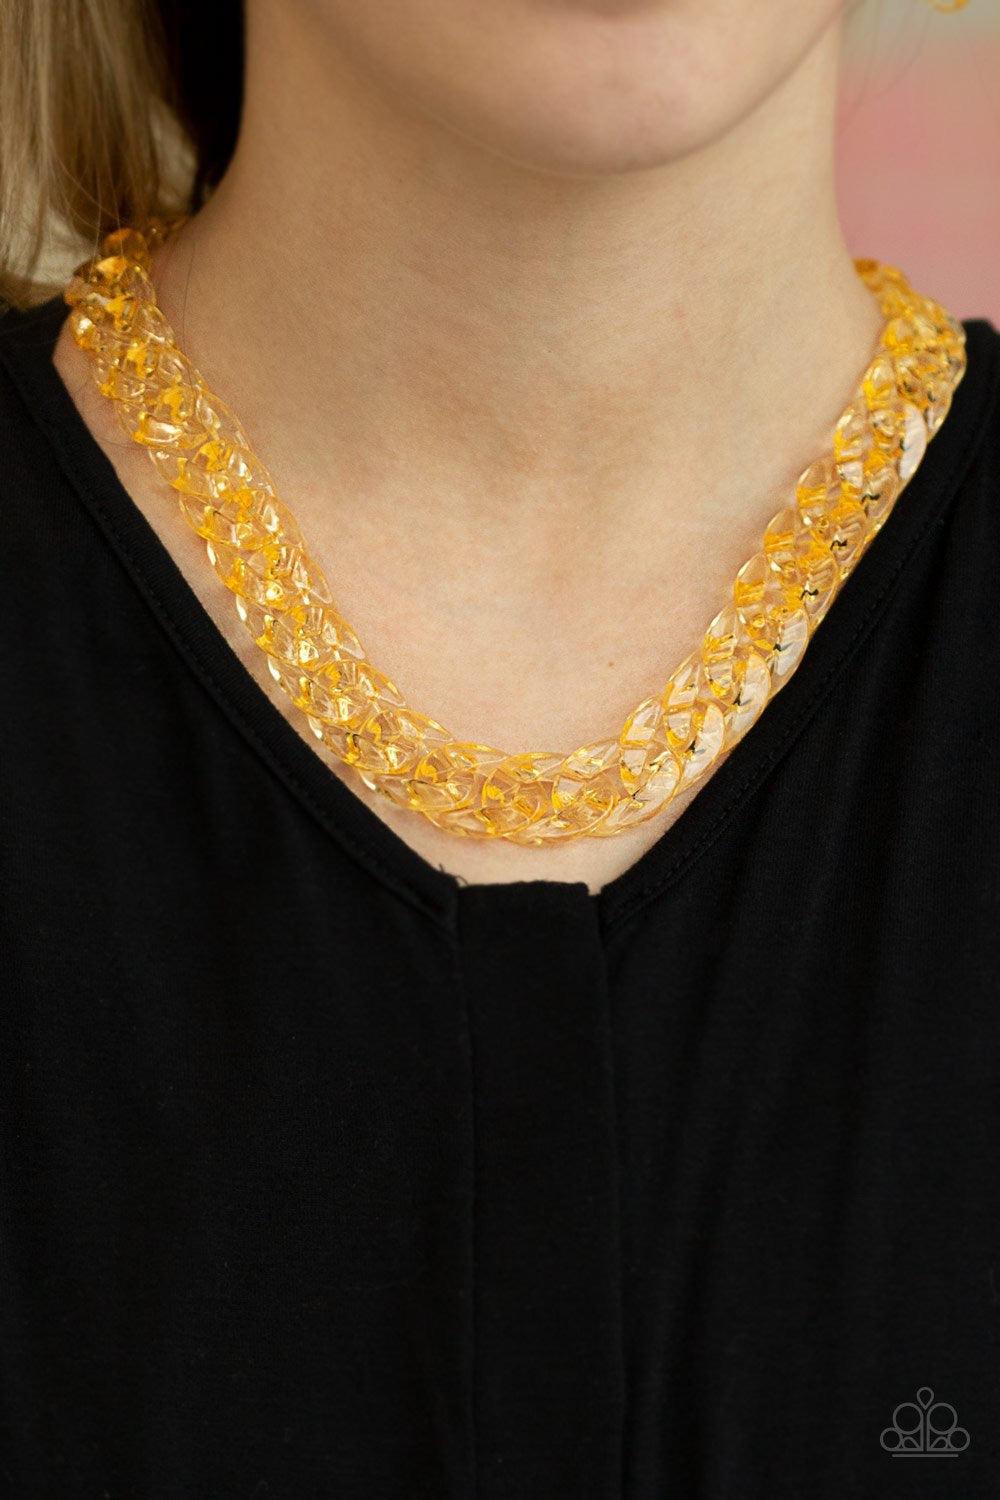 Paparazzi Accessories Put It On Ice - Gold Glassy gold links connect below the collar for a bold statement-making look. Features an adjustable clasp closure. Jewelry